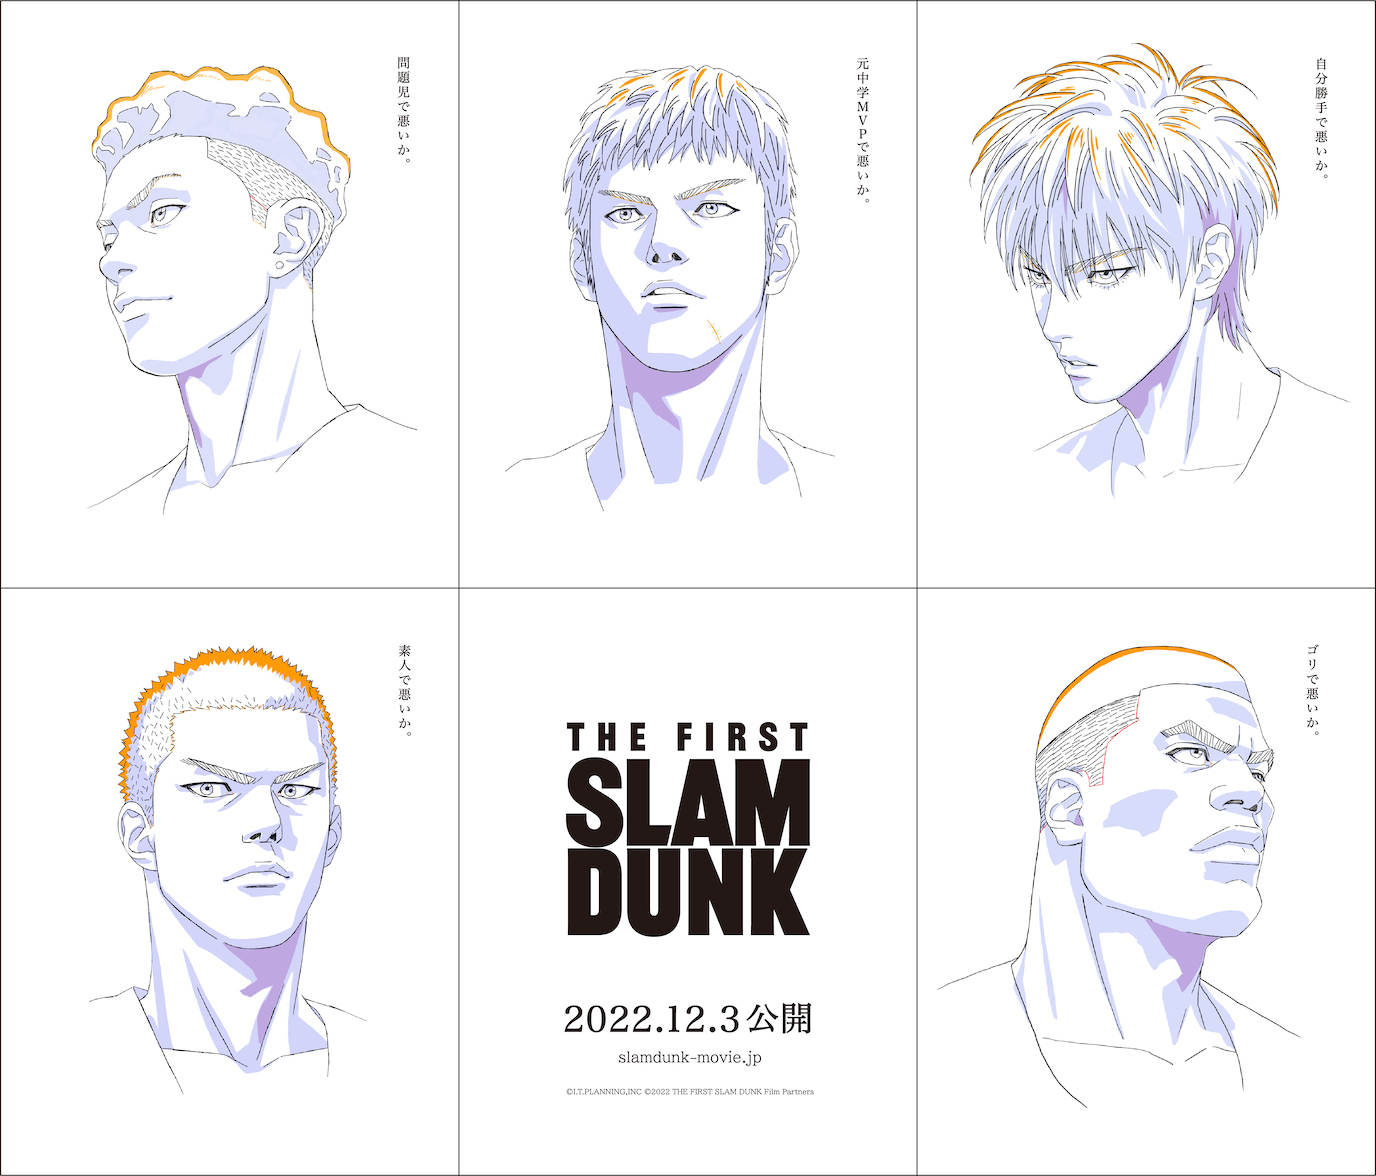 『THE FIRST SLAM DUNK』 （C）I.T.PLANNING, INC.（C）2022 THE FIRST SLAM DUNK Film Partners